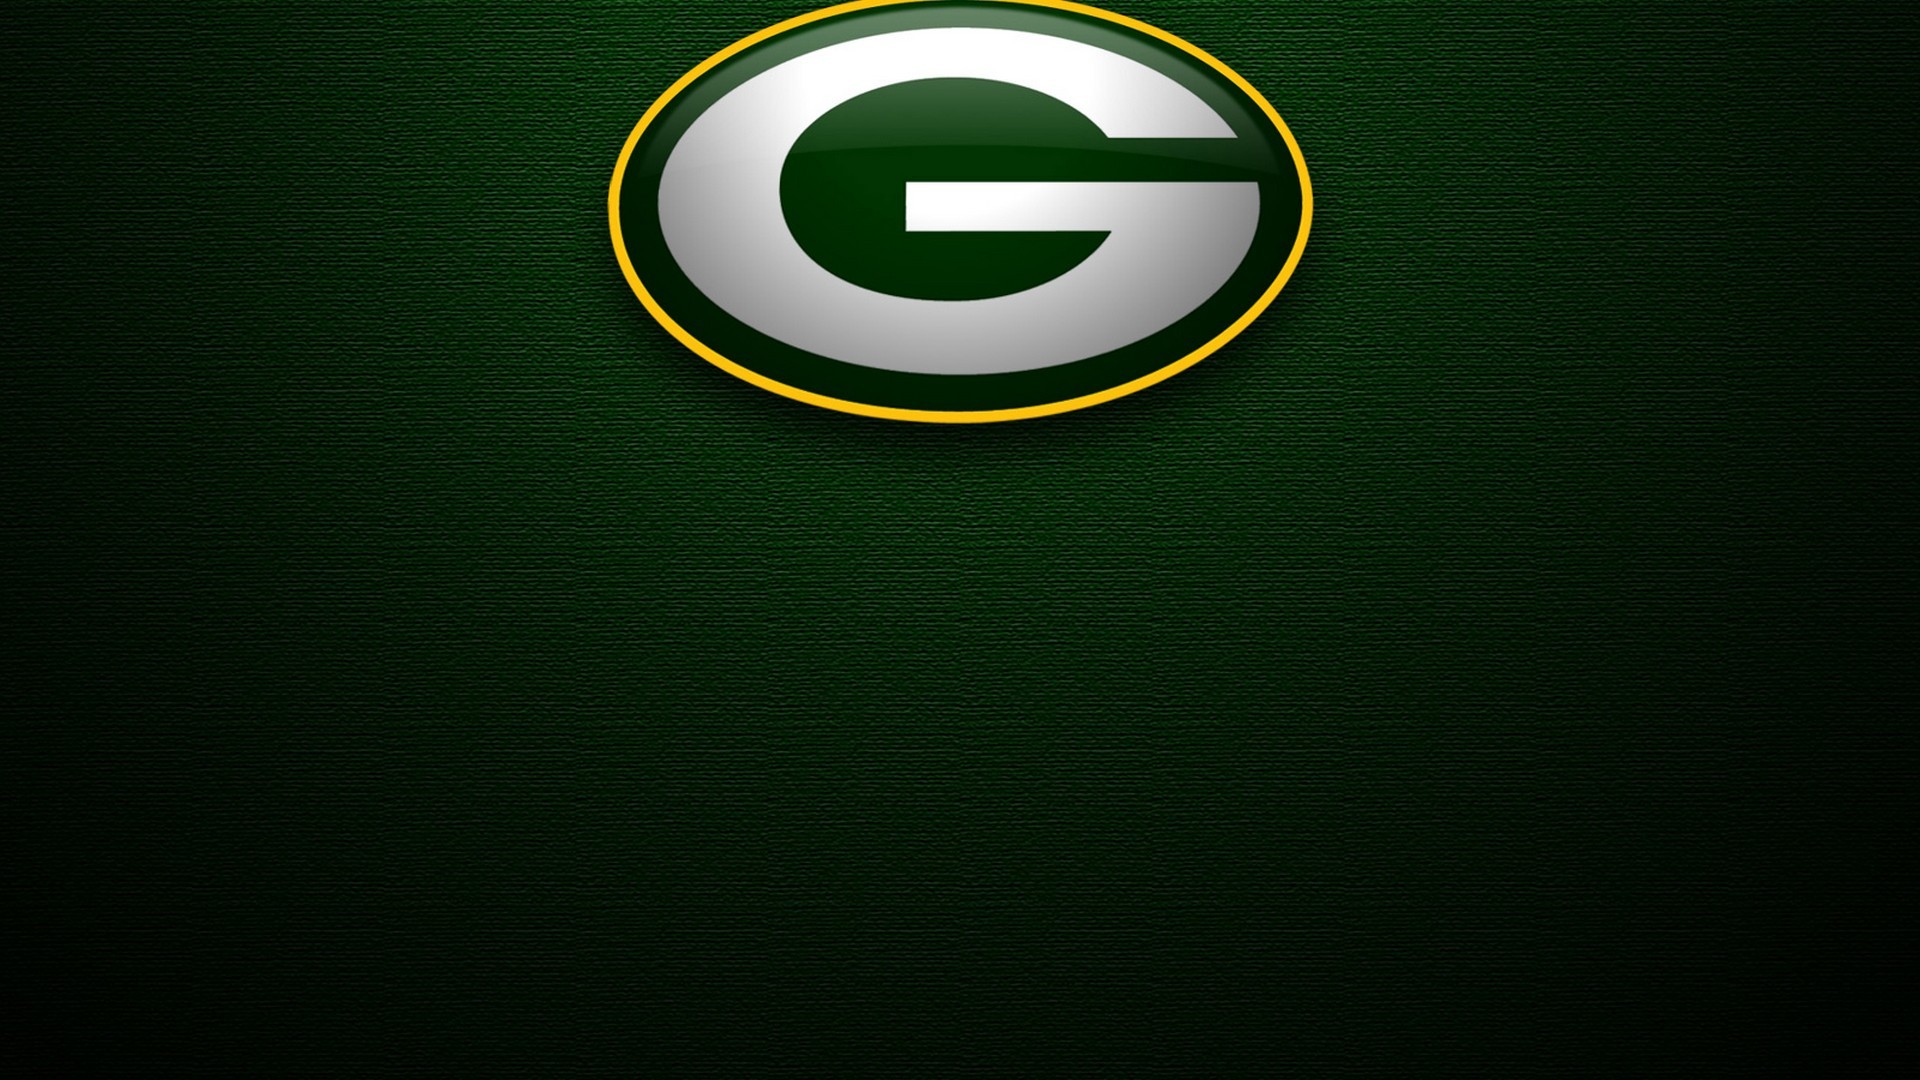 1920x1080 Green Bay Packers NFL Desktop Wallpaper with resolution  pixel.  You can make this wallpaper